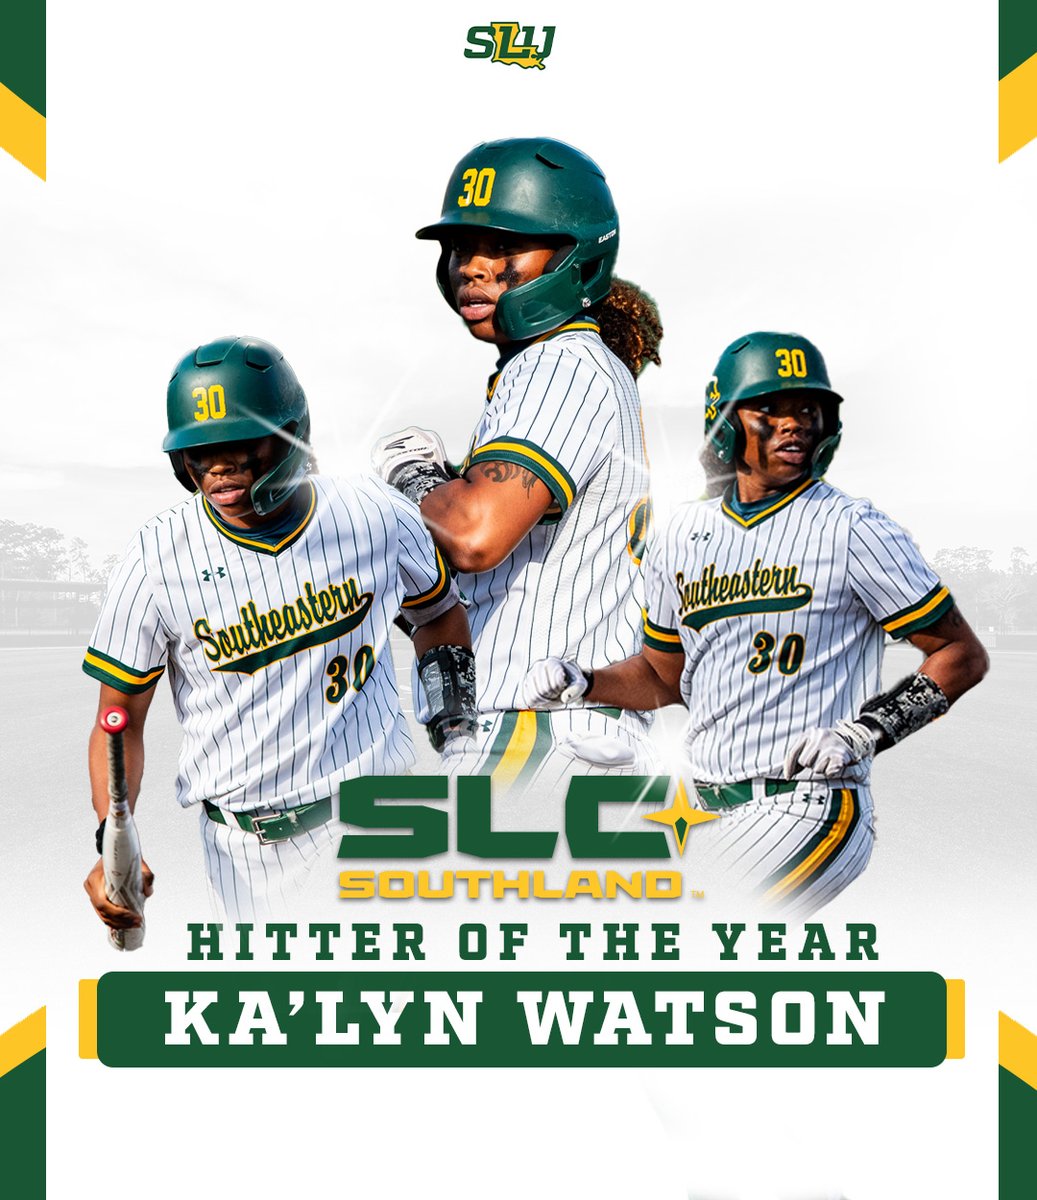 For the second straight season, the @SouthlandSports Hitter of the Year represents @LionUpSoftball | The senior led the team with a .400 batting average, 50 runs, 66 hits and 30 stolen bases during the regular season #LionUp